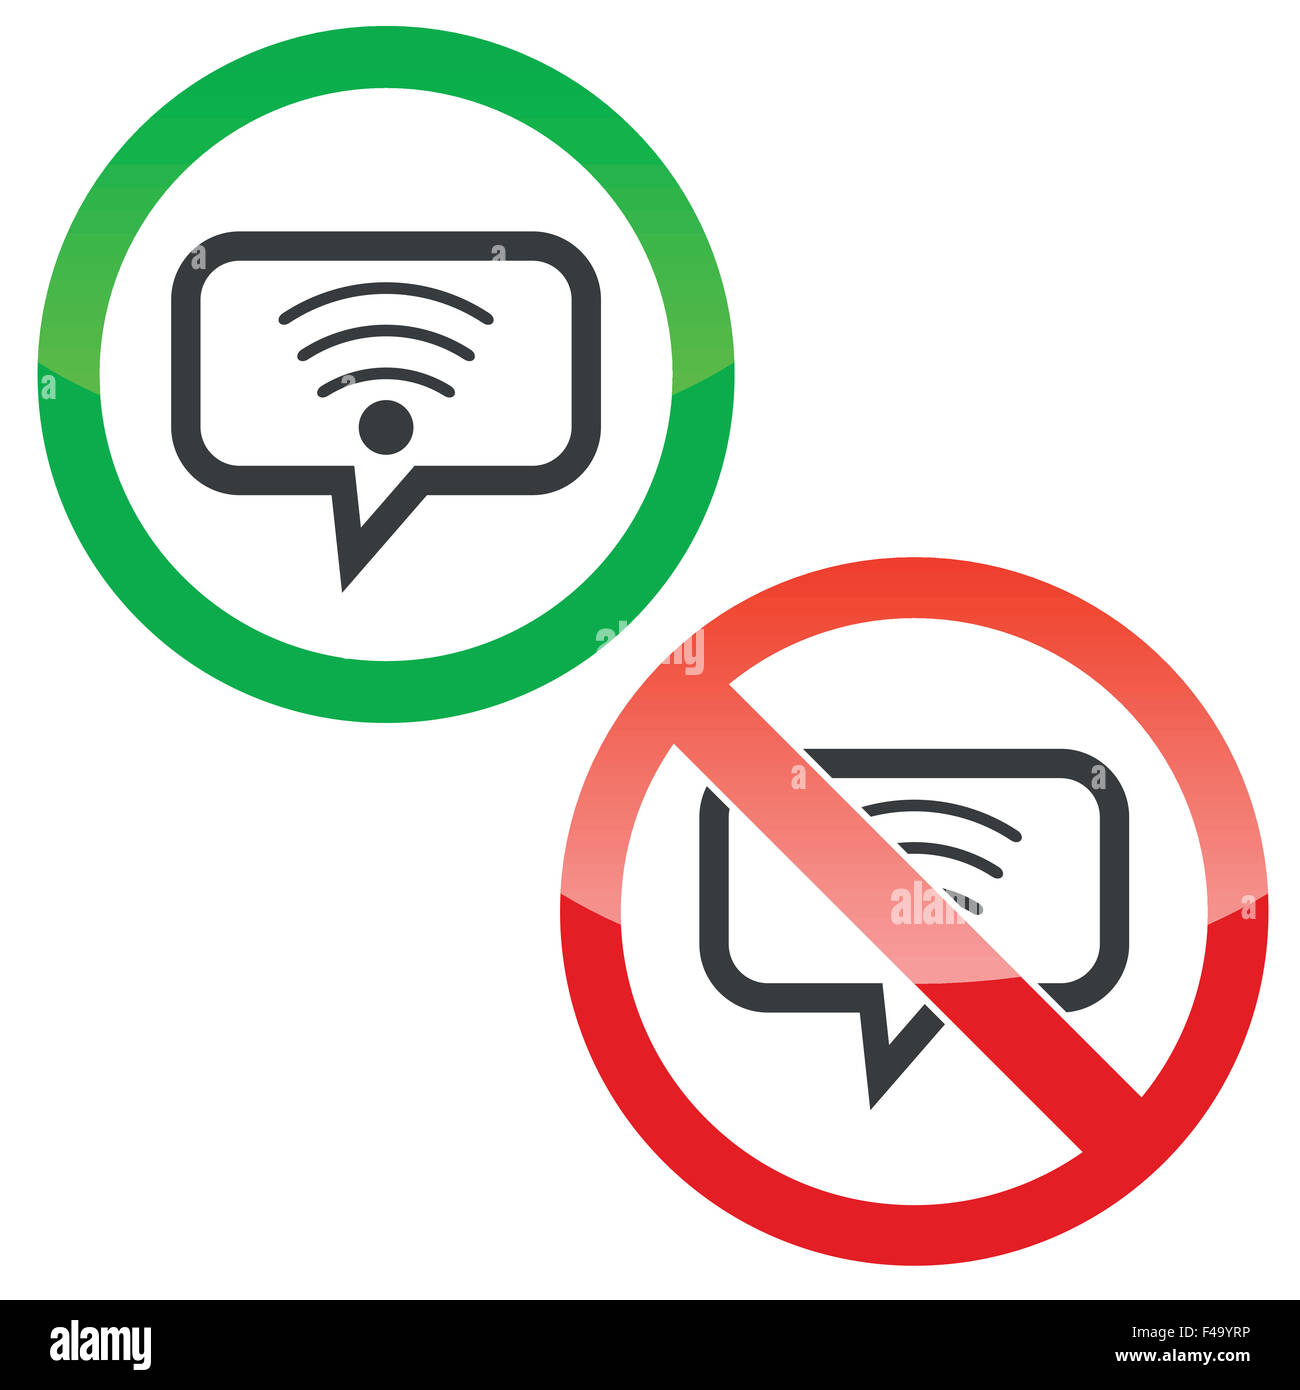 Wi-Fi message permission signs Stock Photo